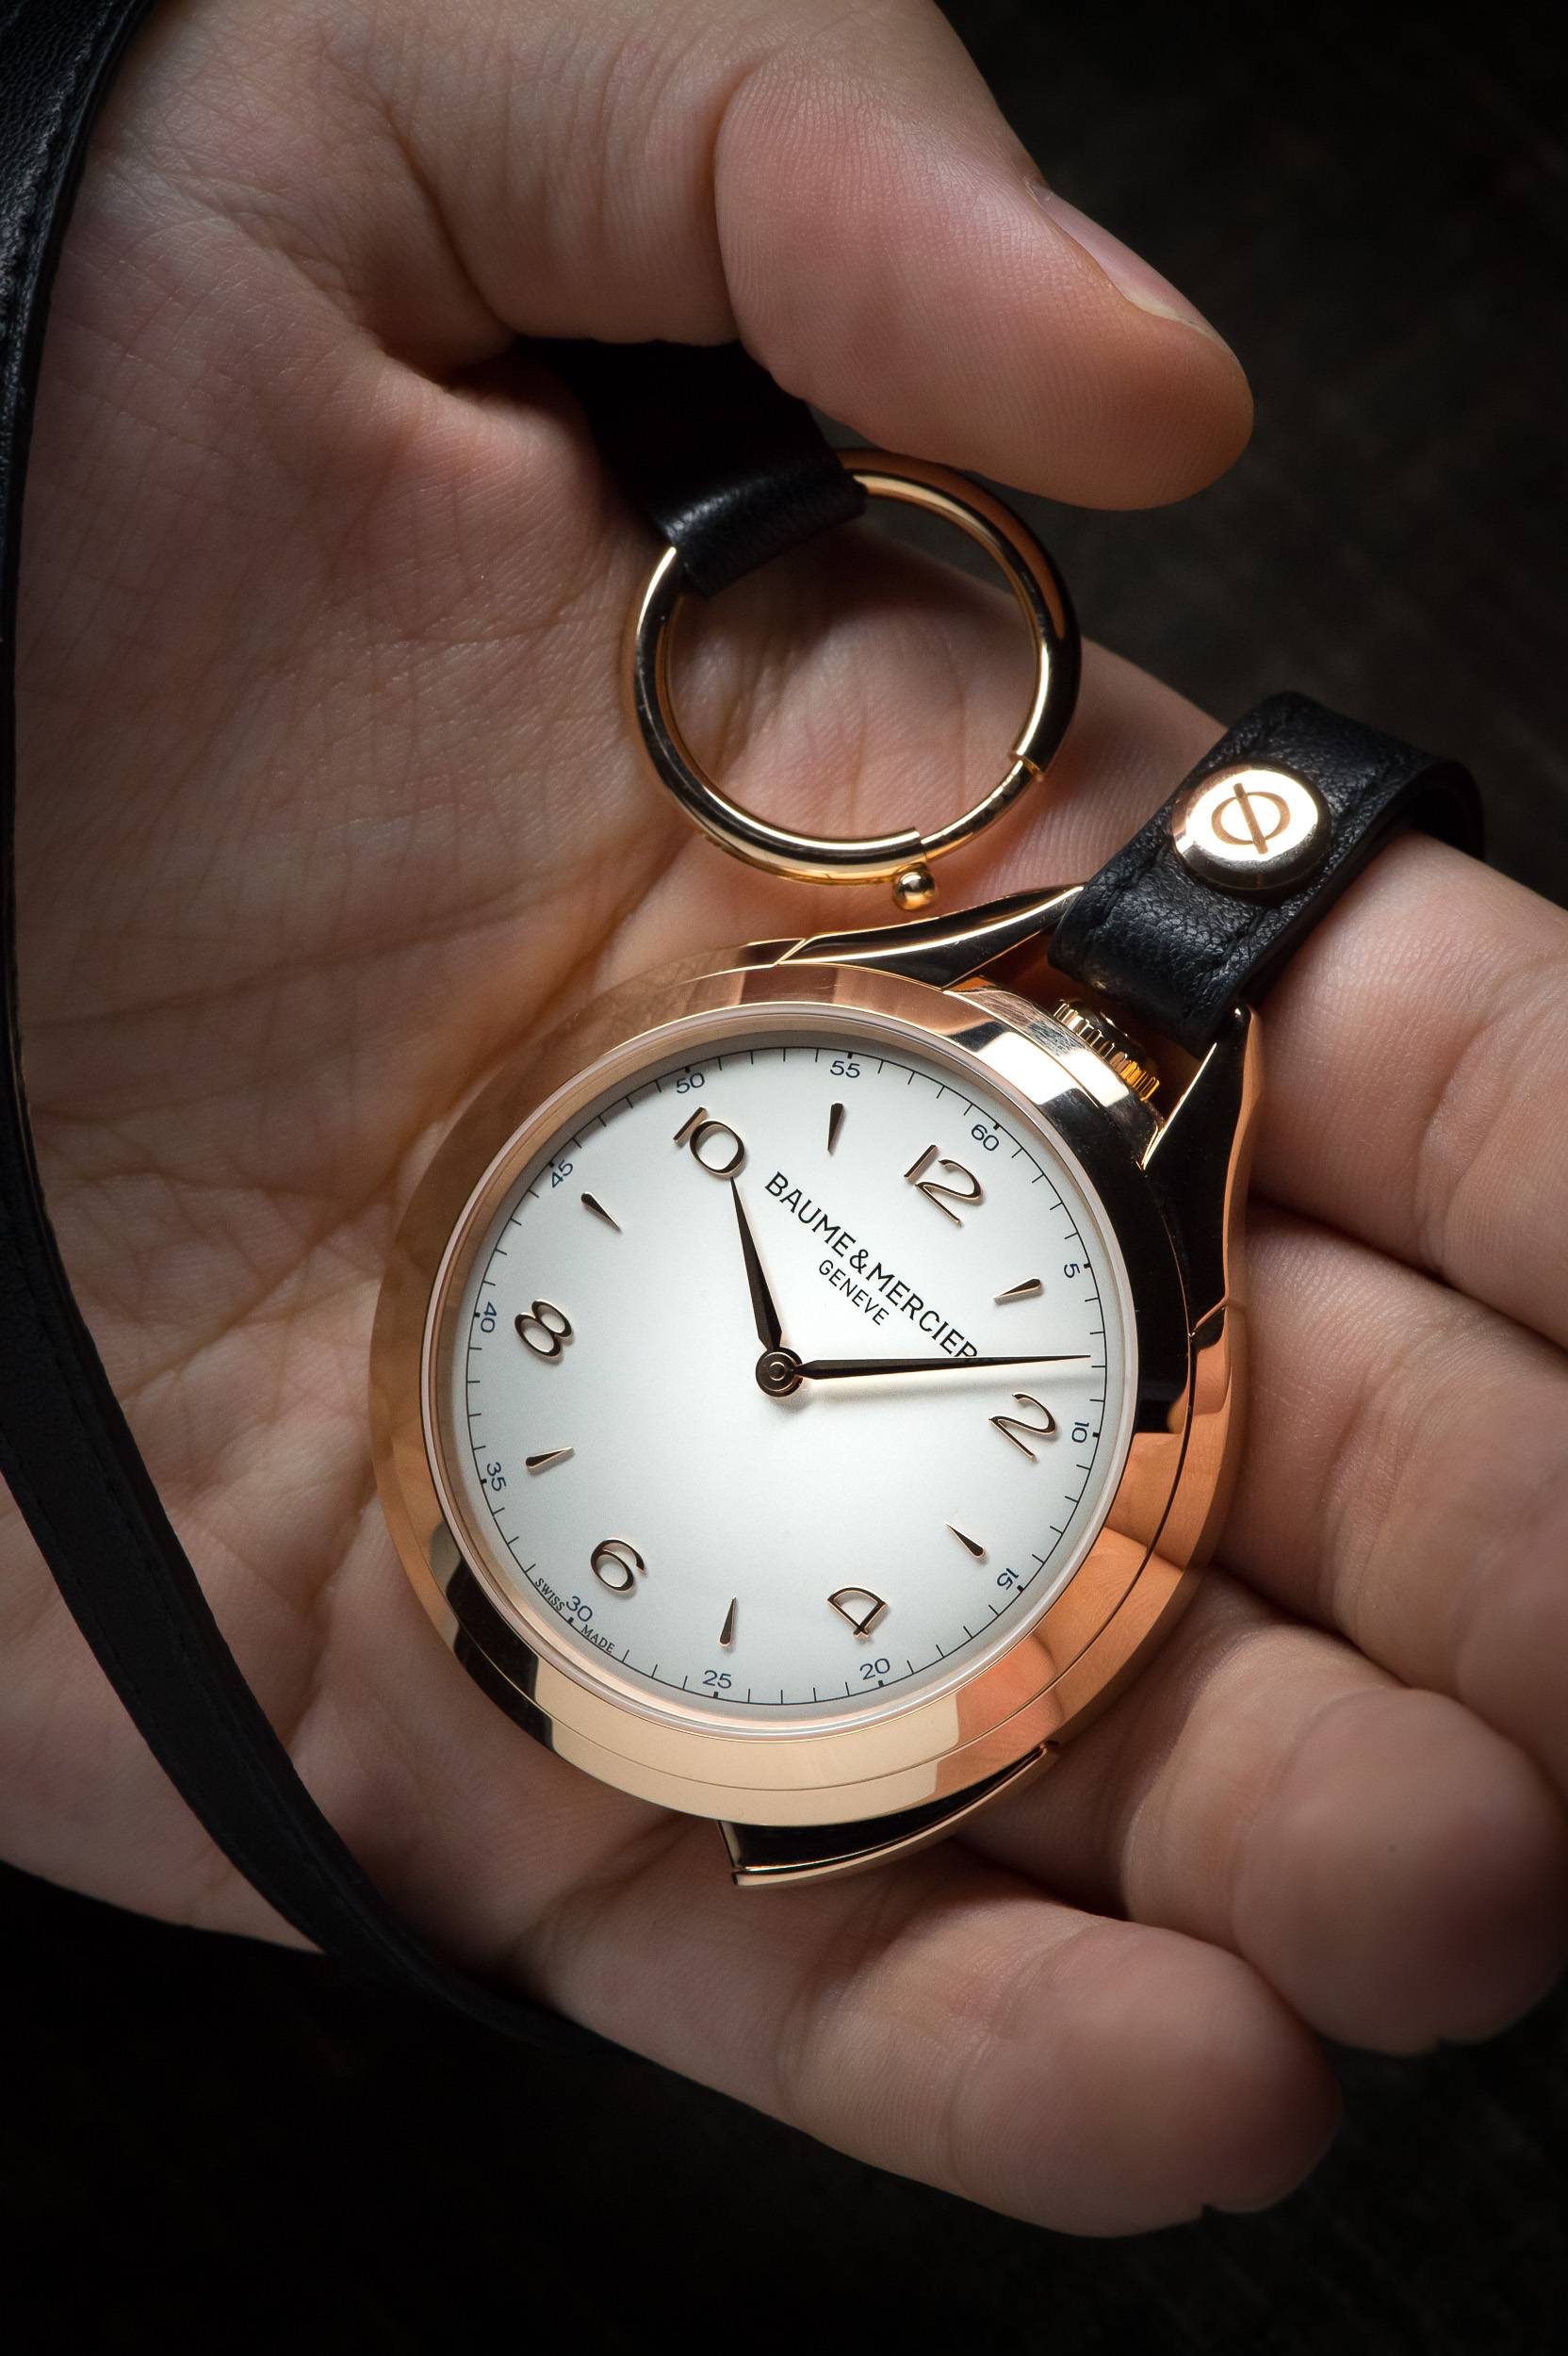 Introducing The Clifton 1830 Five Minute Repeater Pocket Watch, A Limited Series Anniversary Timepiece From Baume & Mercier